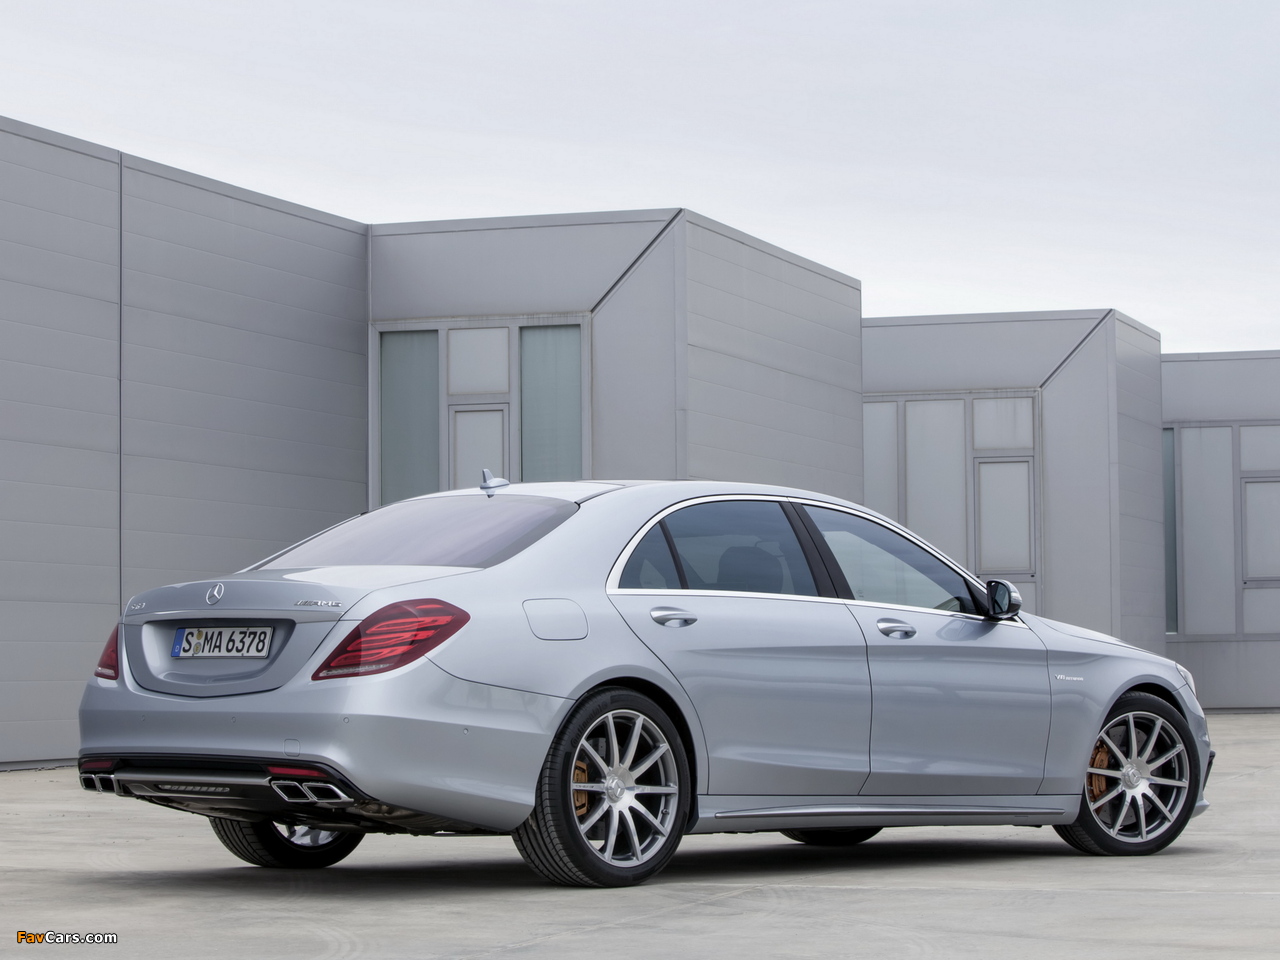 Mercedes-Benz S 63 AMG (W222) 2013 images (1280 x 960)